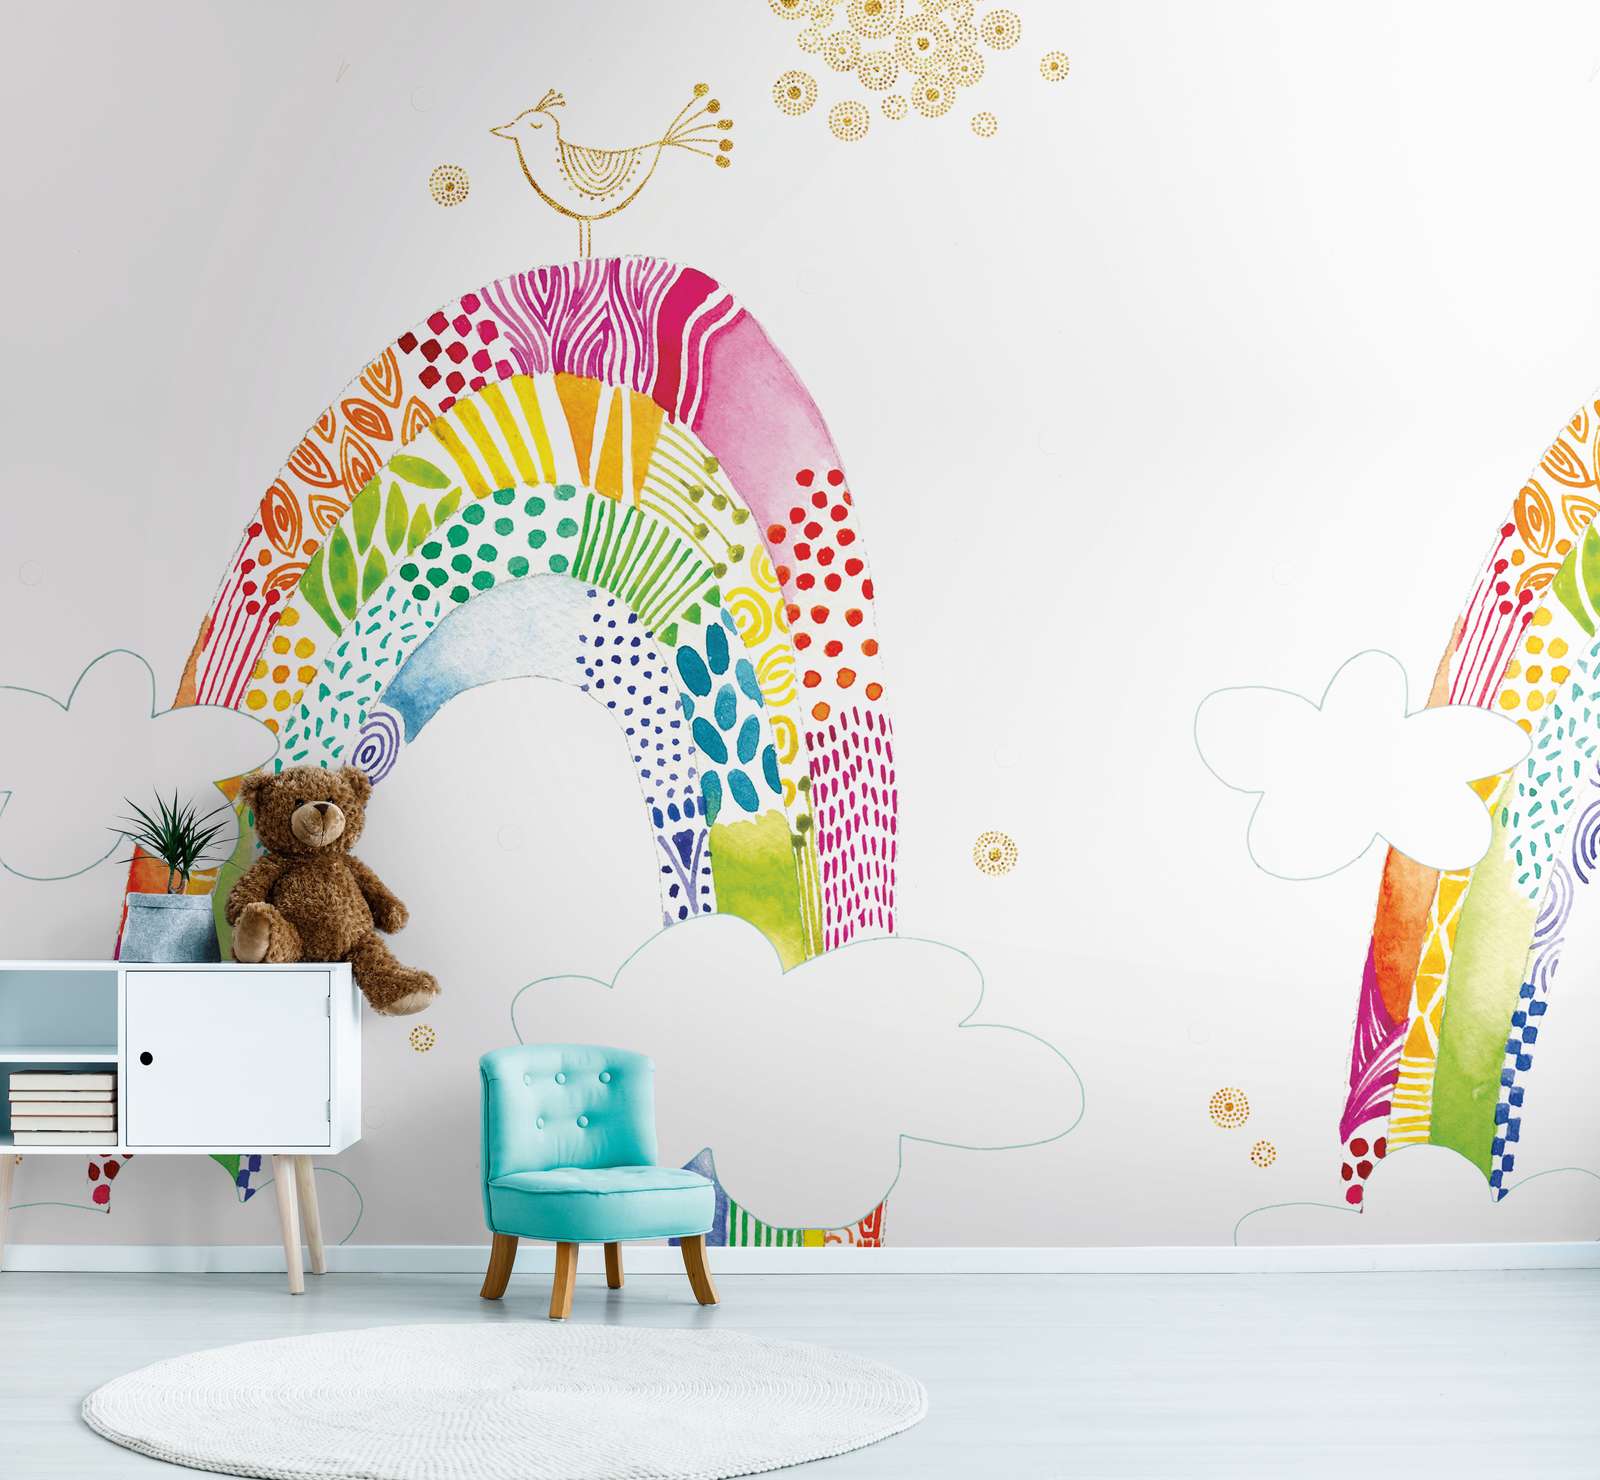             Children's motif wallpaper with colourful rainbow and bird - colourful, white, pink
        